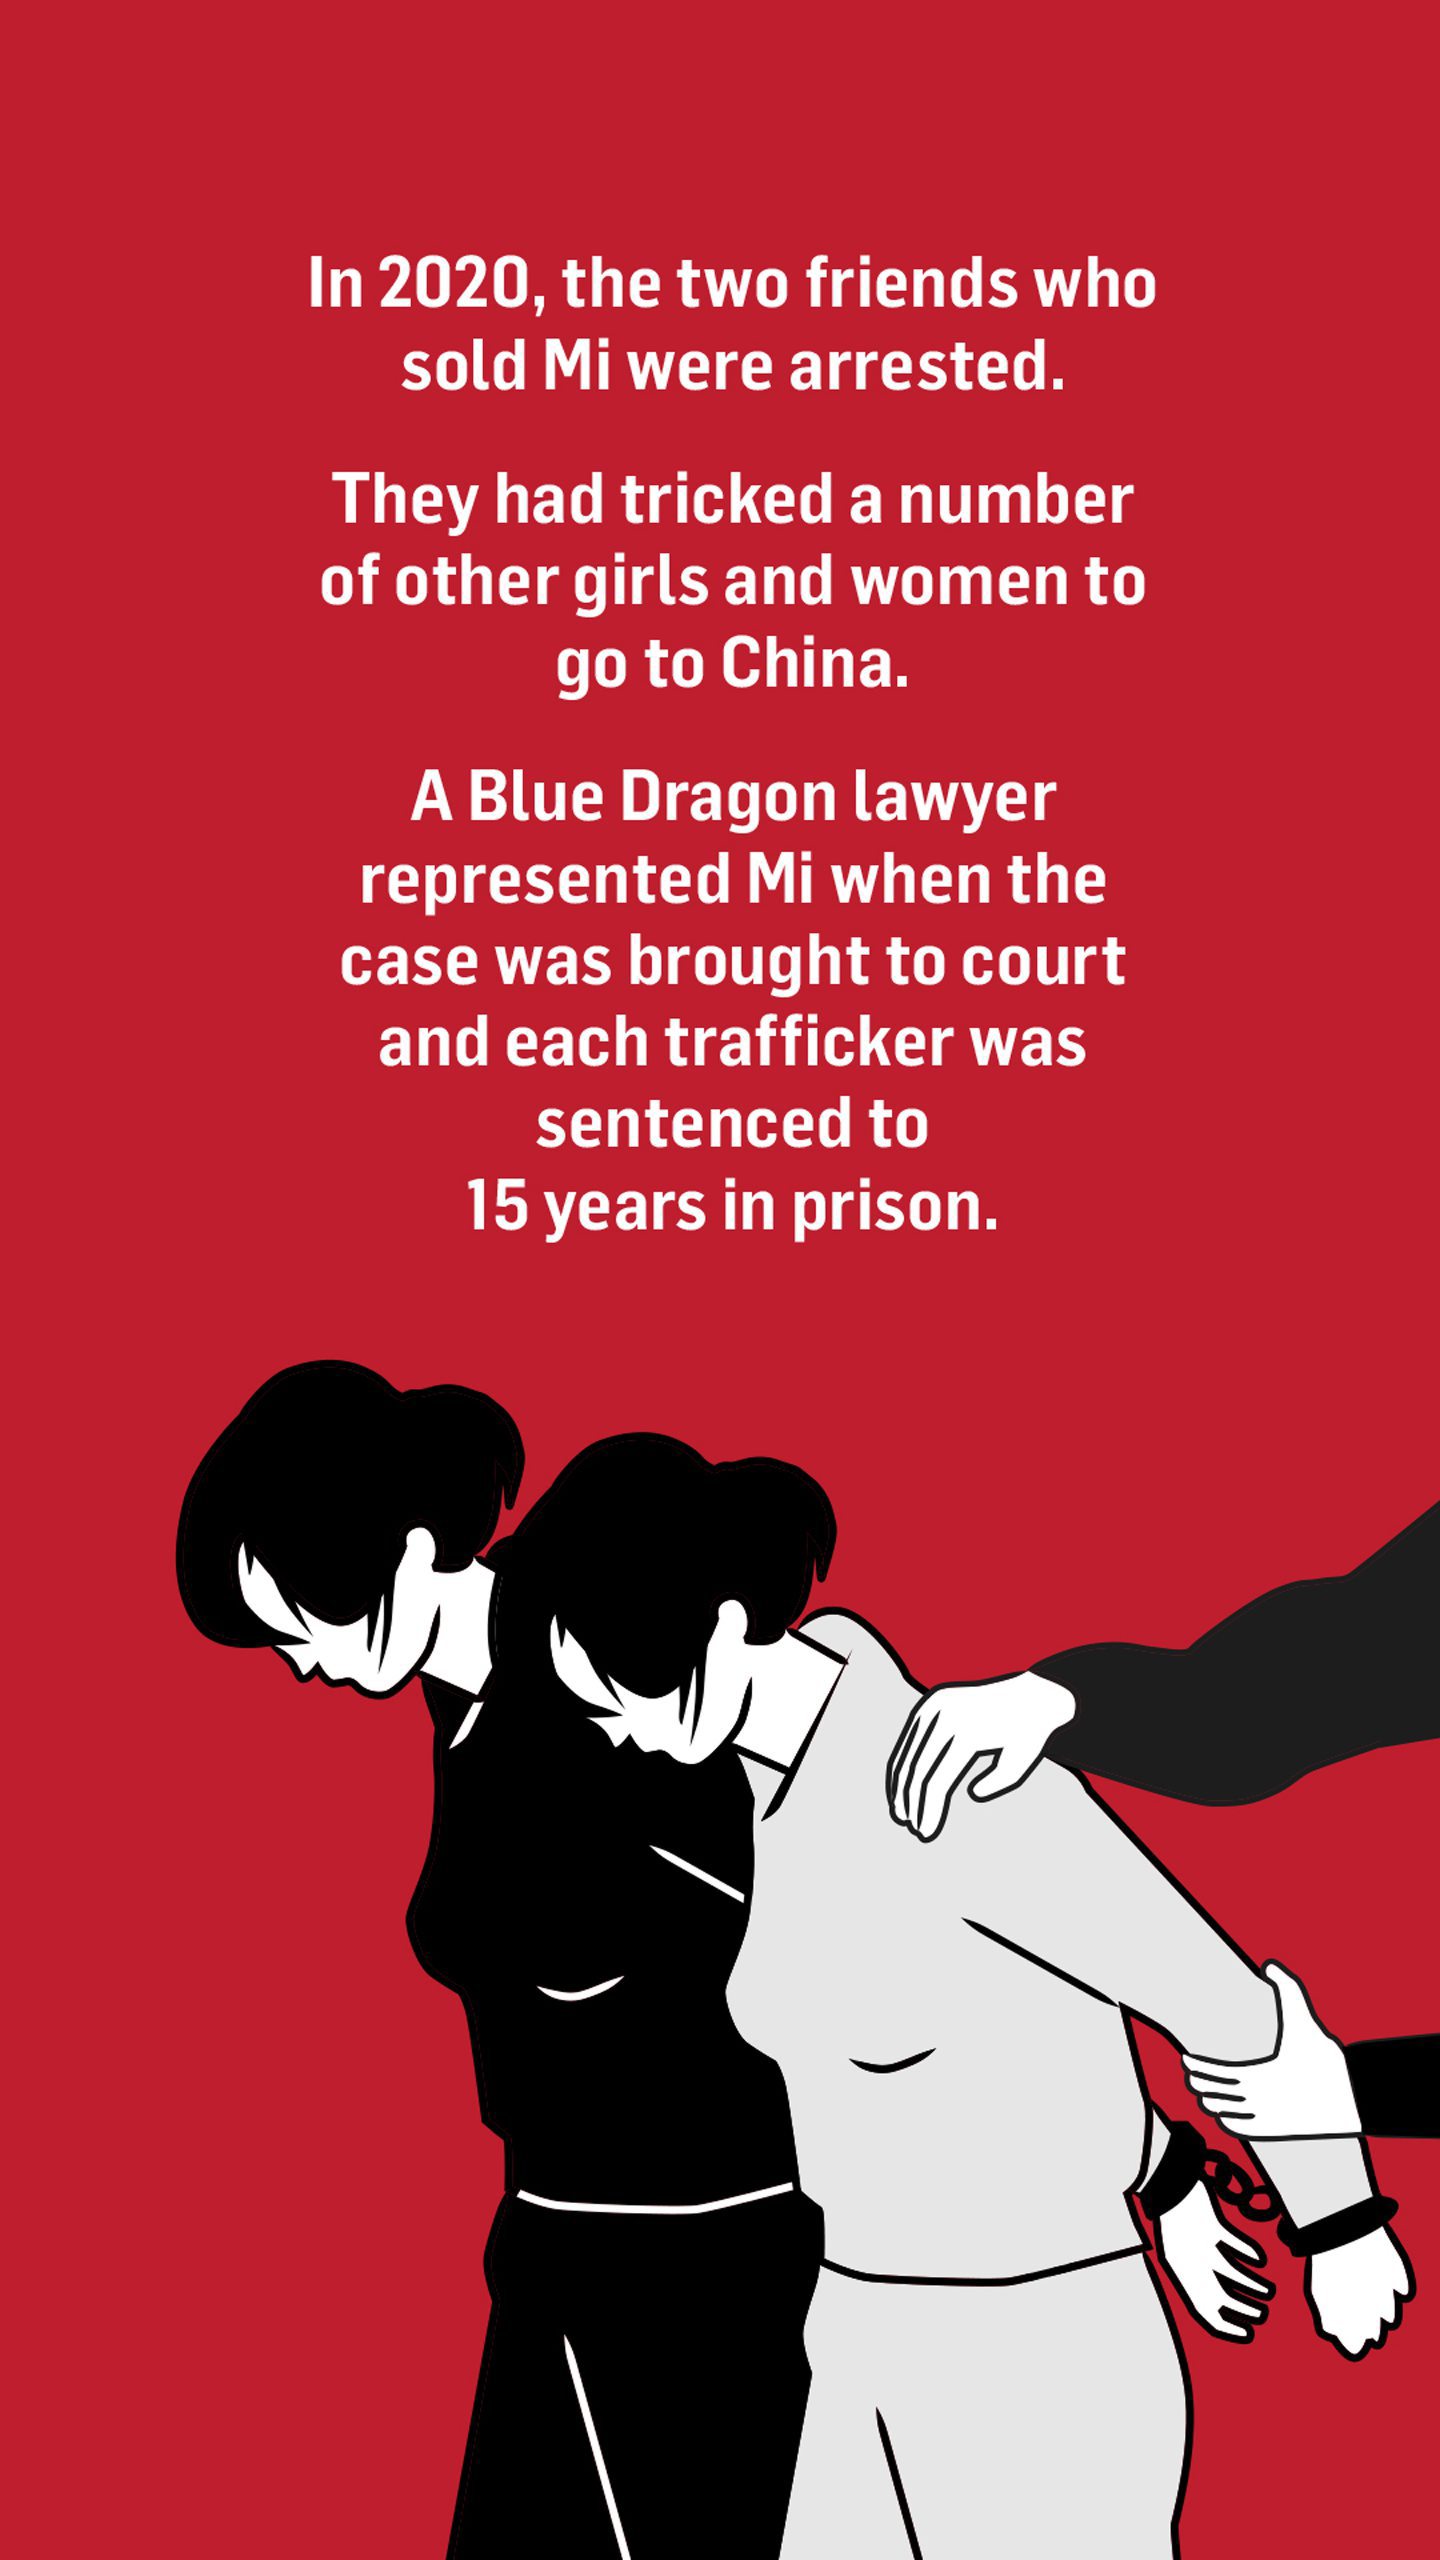 Two women being arrested and led away. The text reads: In 2020, the two friends who sold Mi were arrested.

They had tricked a number of other girls and women to go to China.

A Blue Dragon lawyer represented Mi when the case was brought to court and each trafficker was sentenced to 15 years in prison.